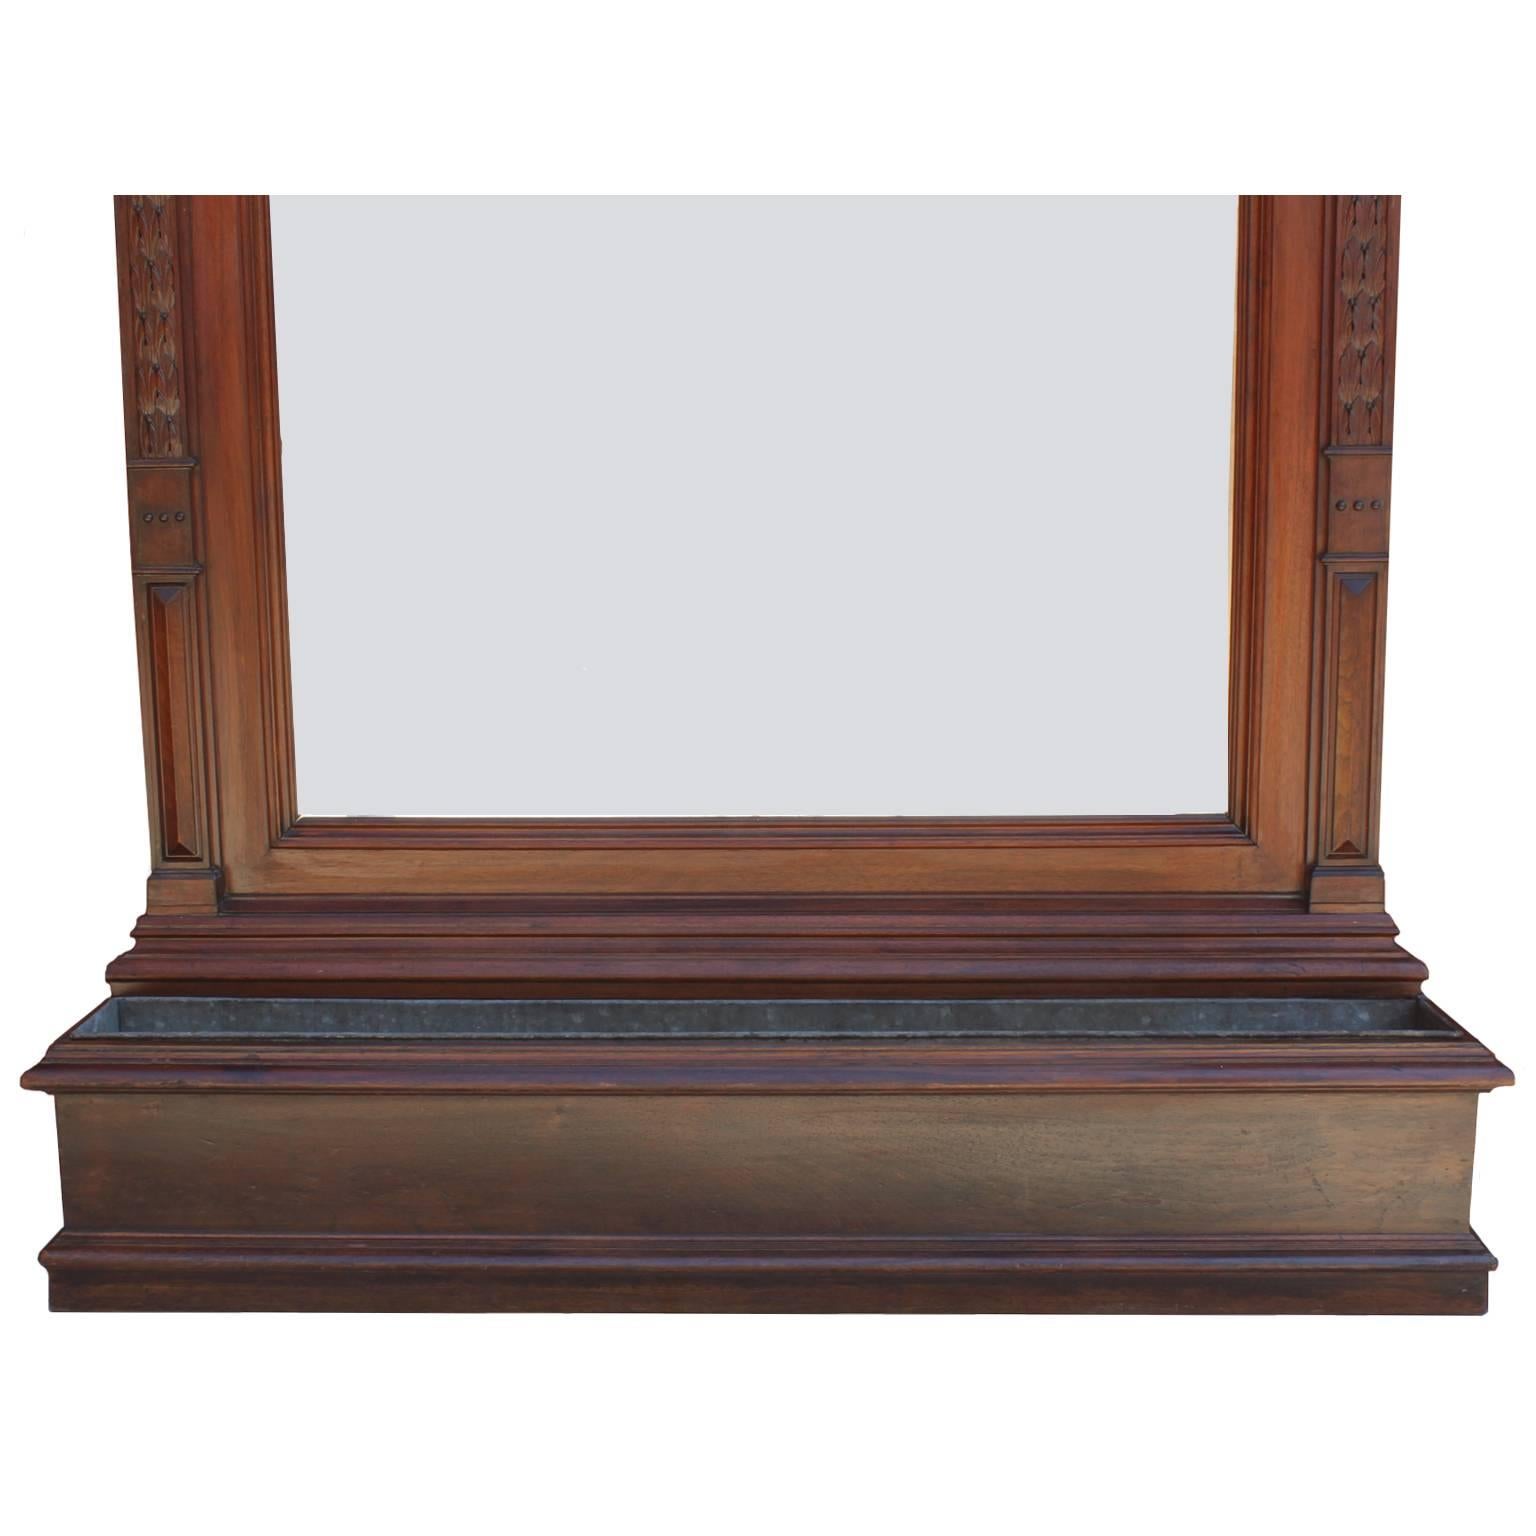 Early 20th Century French 19th-20th Century Louis XVI Style Carved Mahogany Architectural Mirror